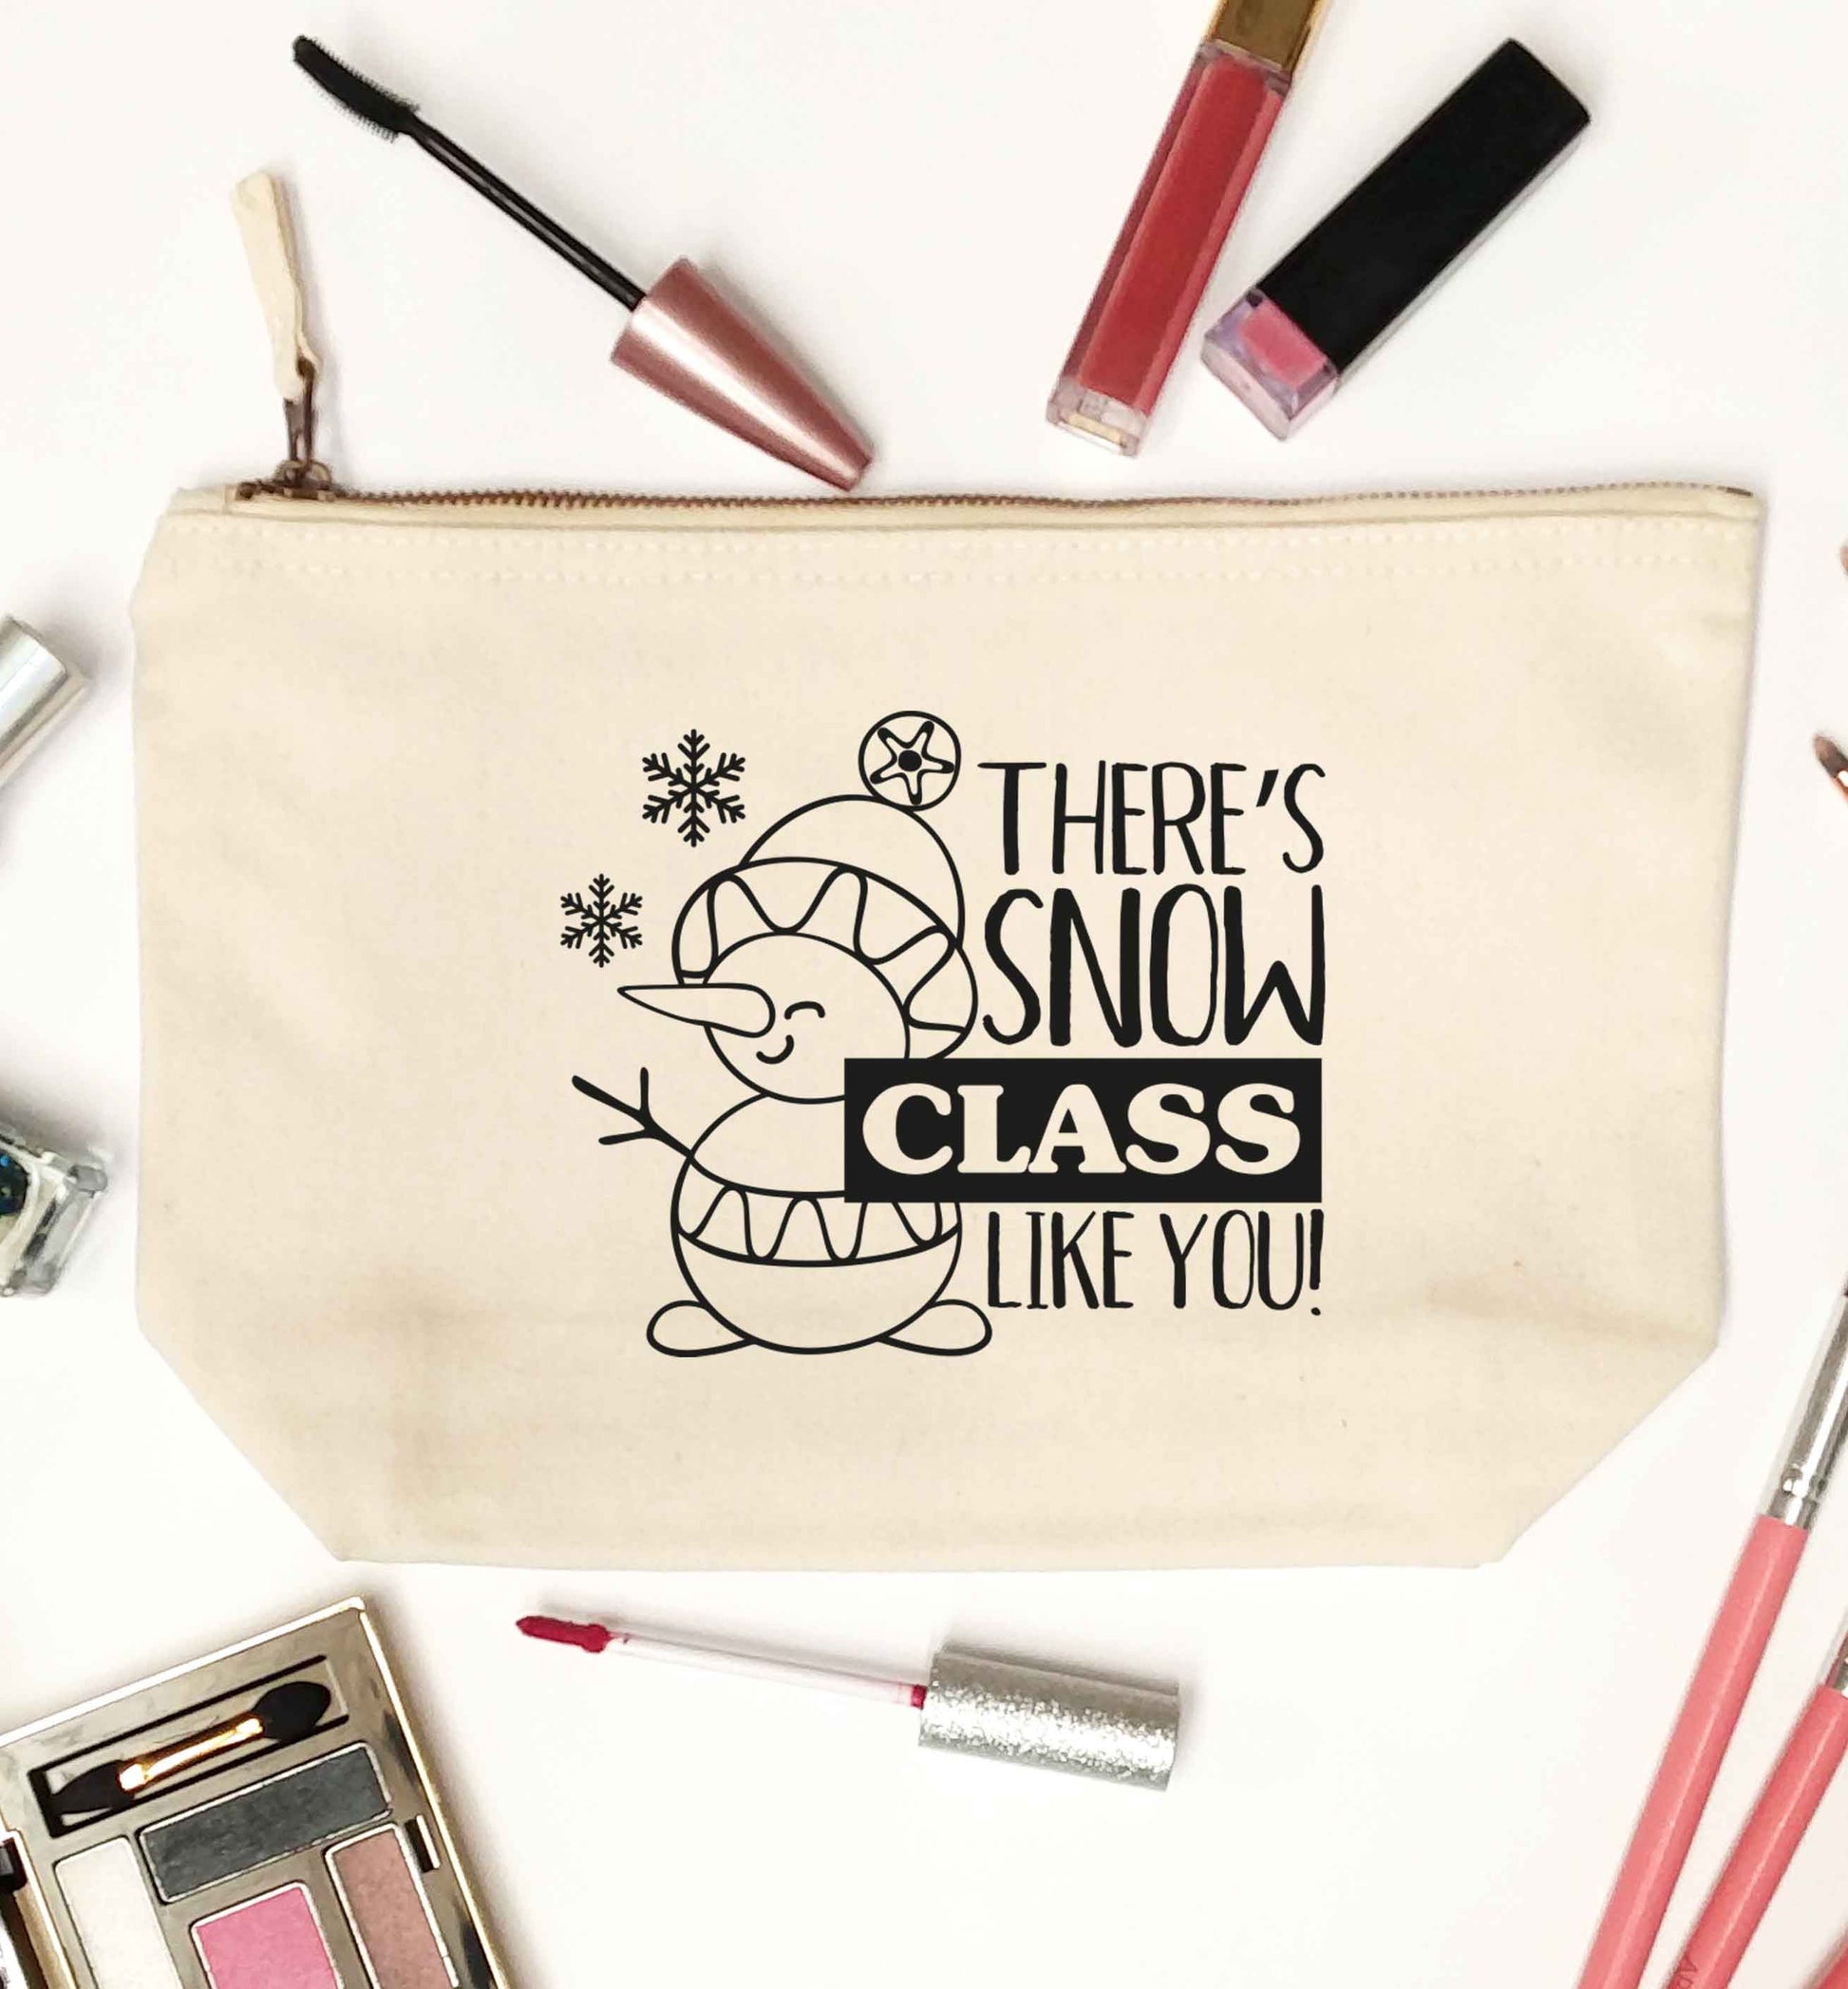 There's snow class like you natural makeup bag